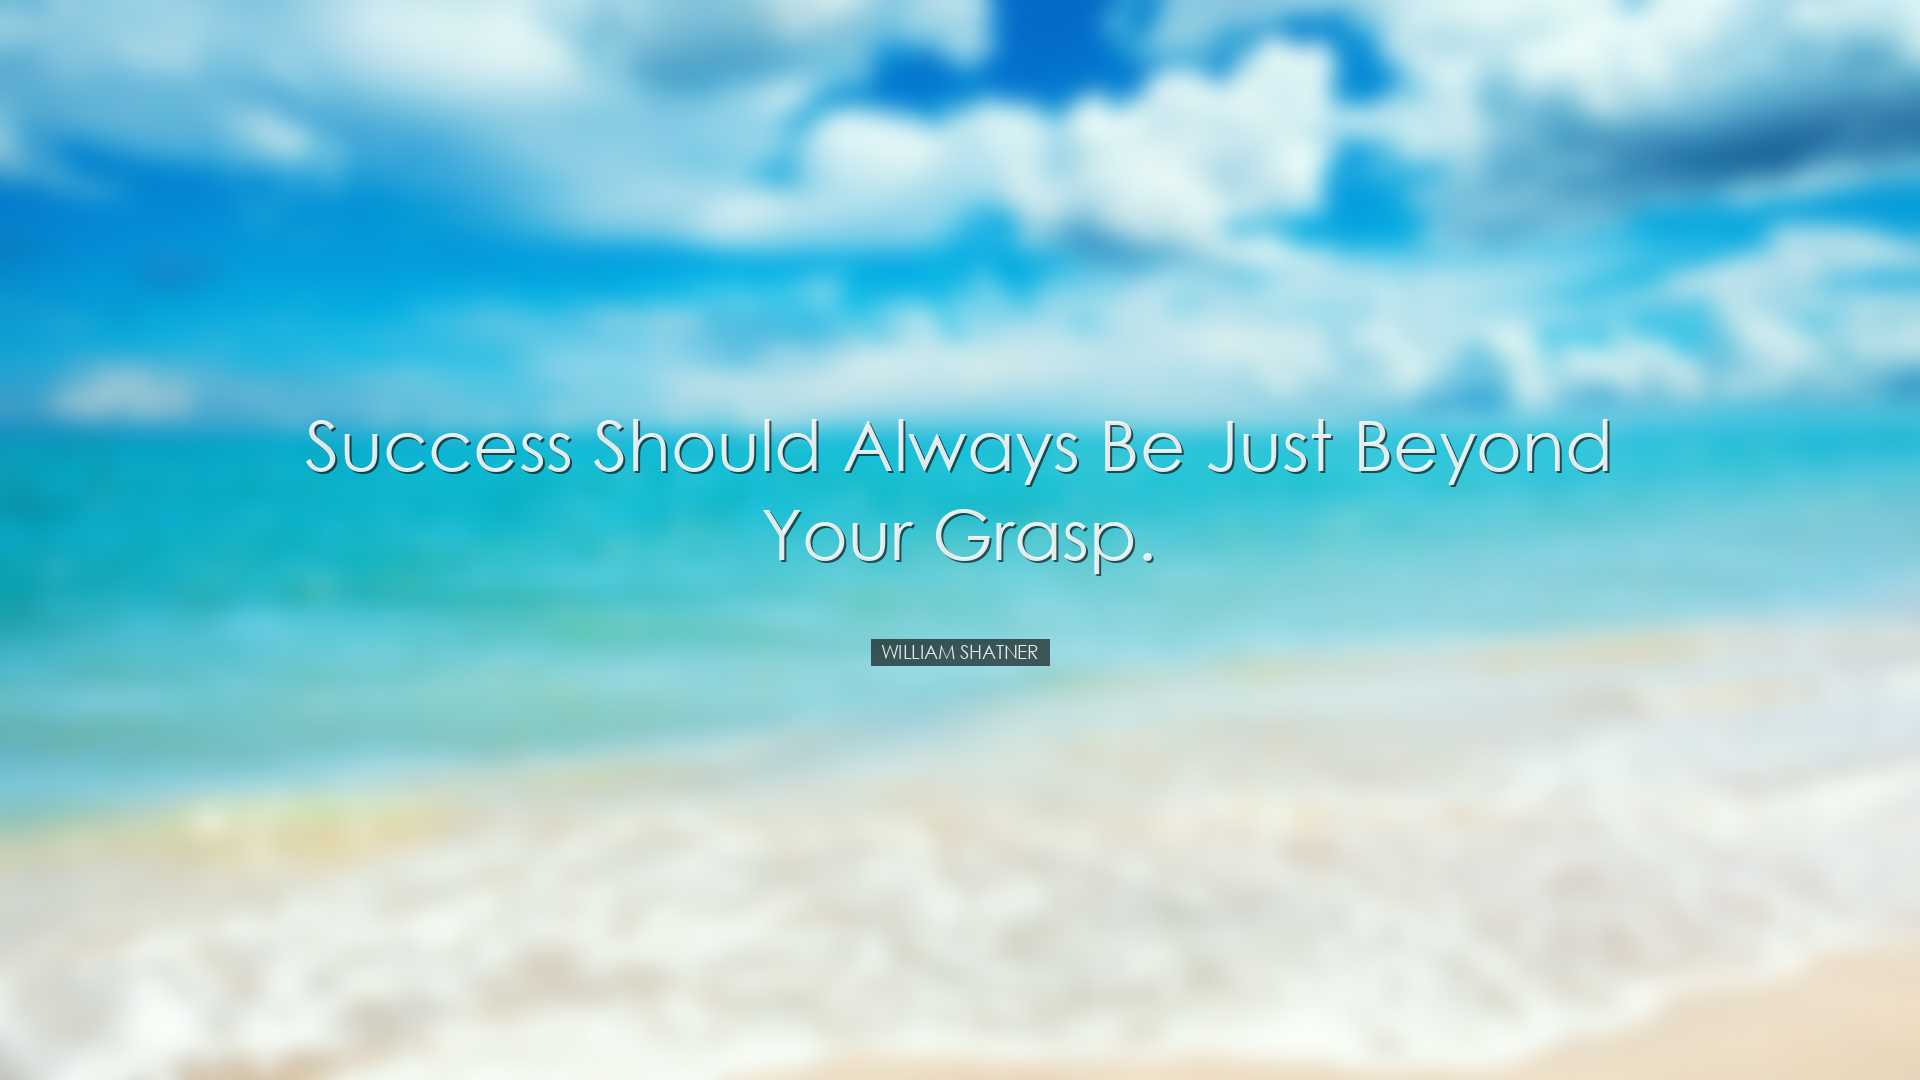 Success should always be just beyond your grasp. - William Shatner